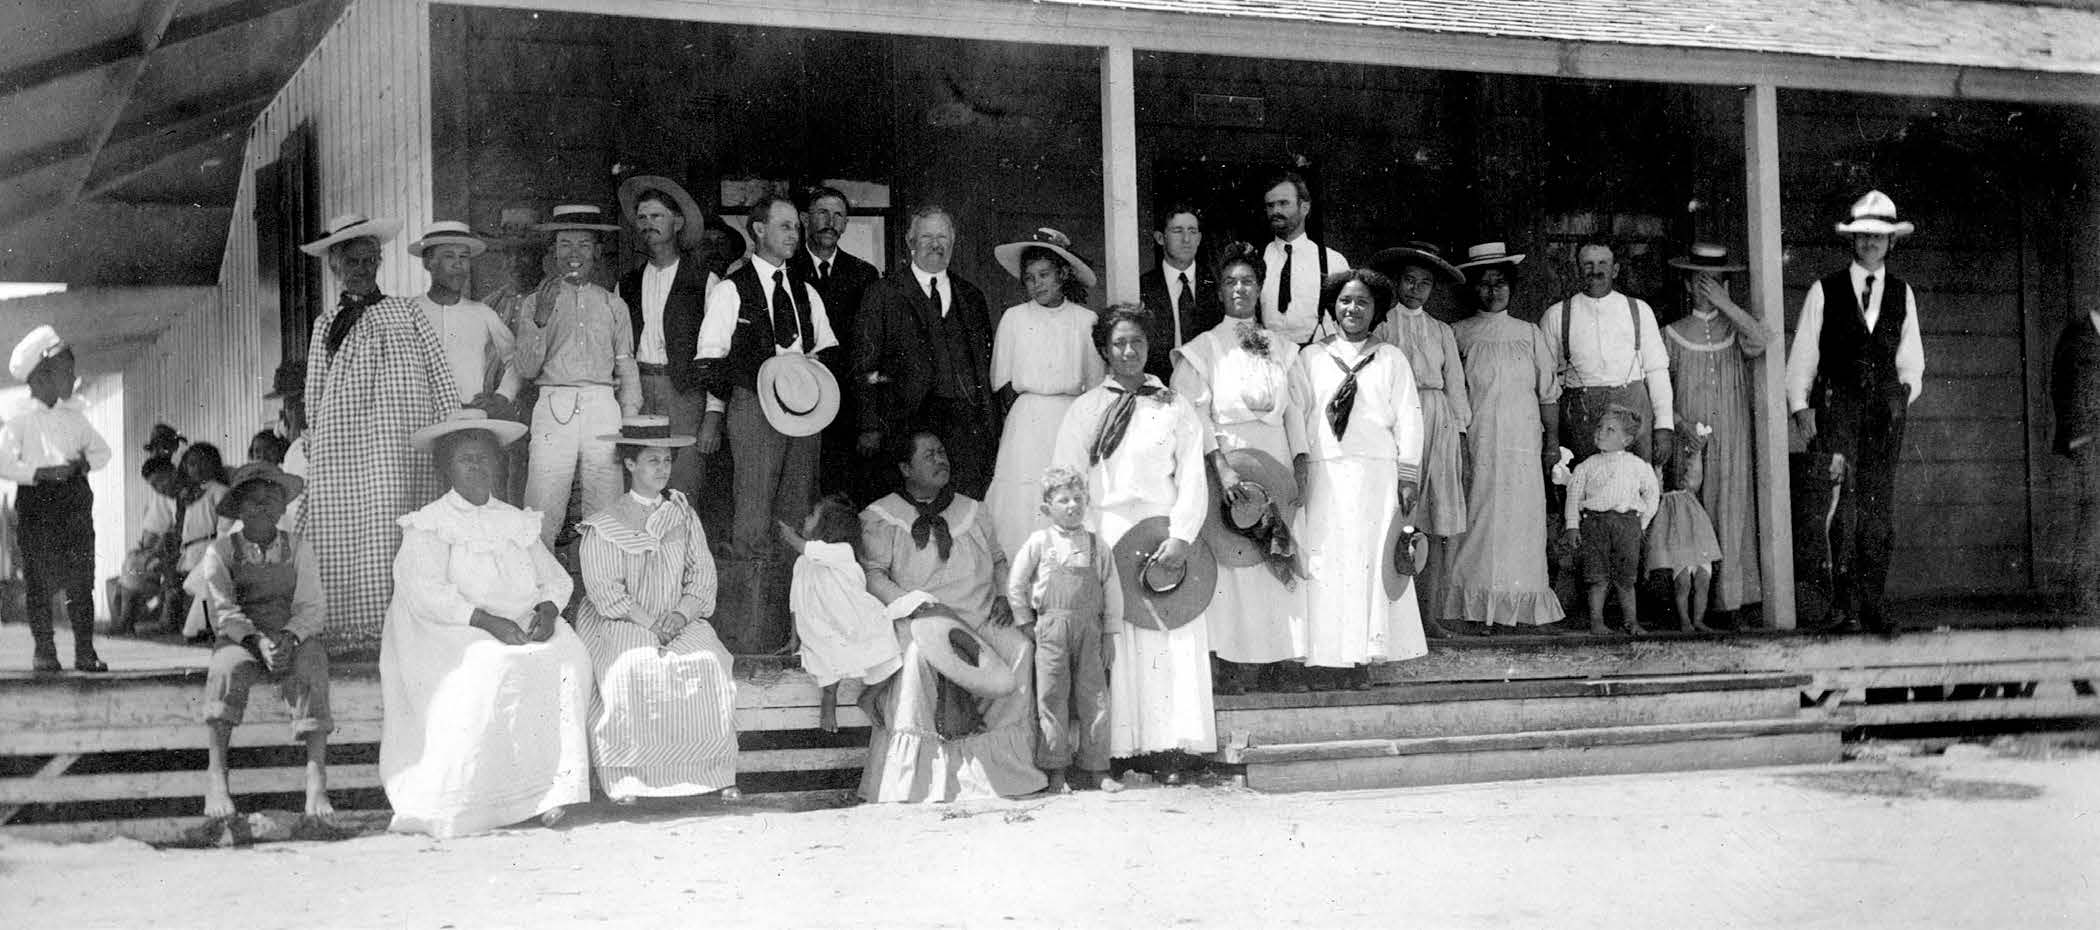 The Saints in Lāʻie welcomed and accommodated hundreds of members arriving by train for the temple dedication. Courtesy of Church History Library.